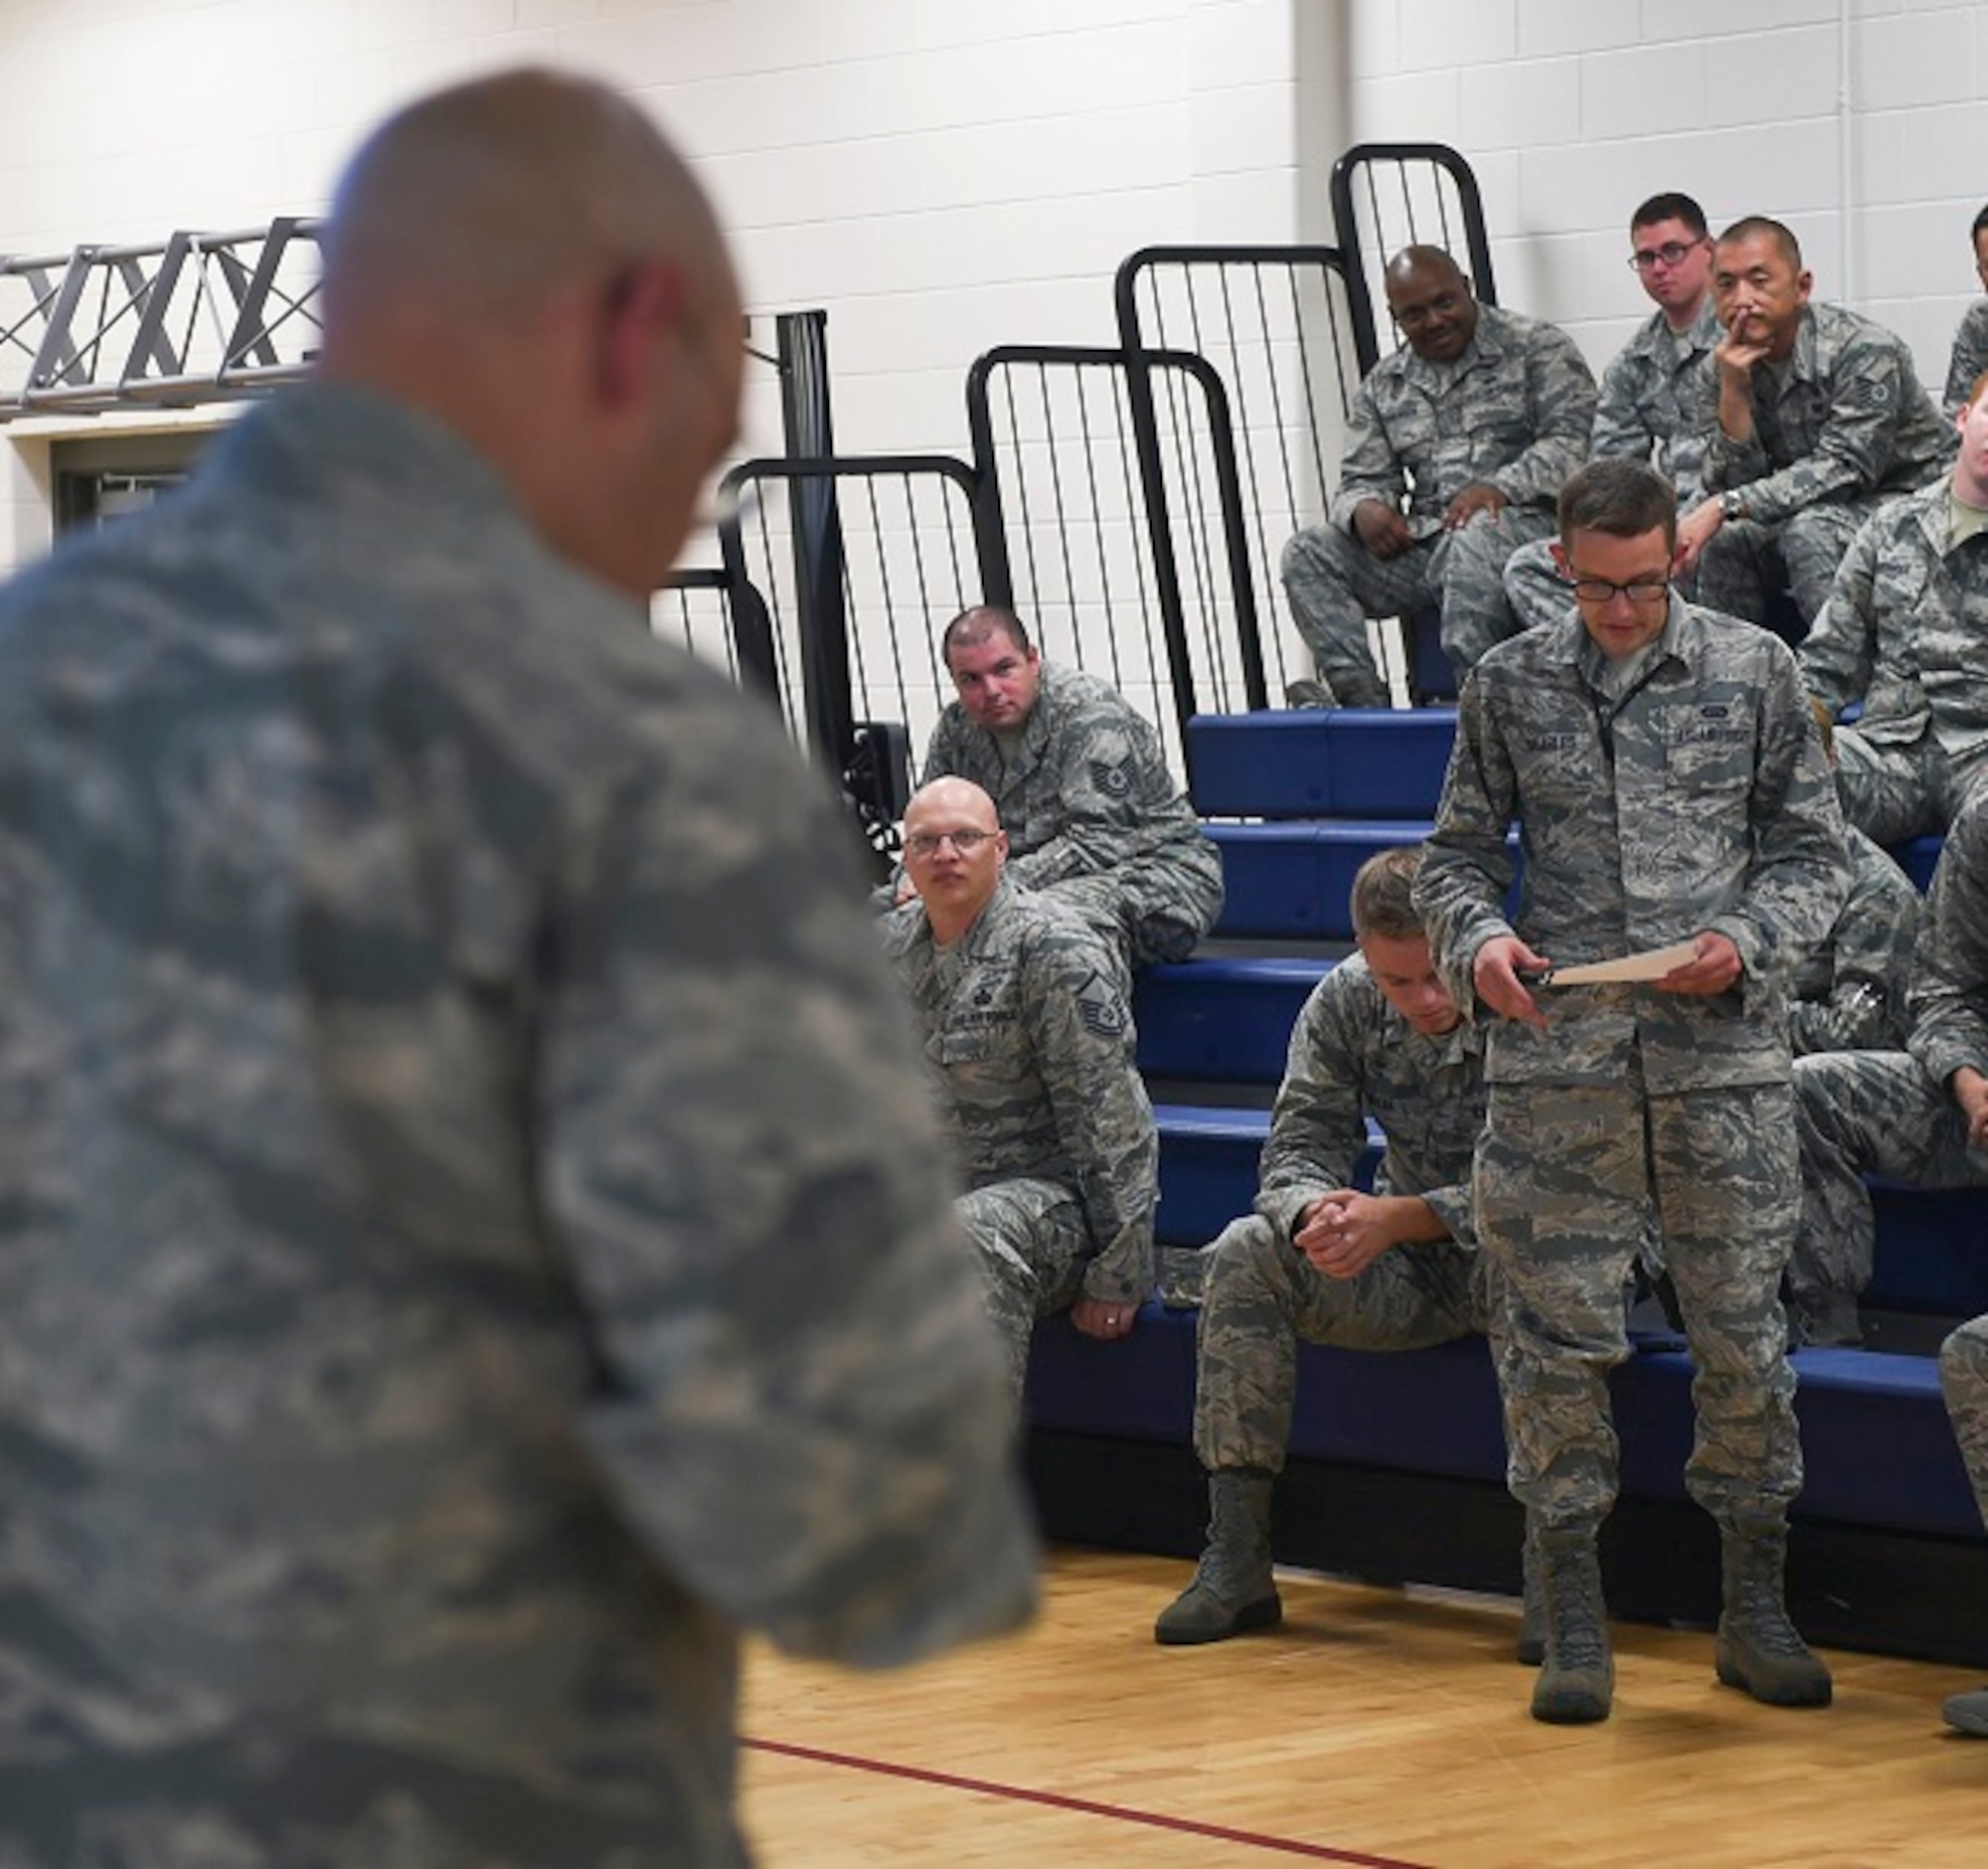 Senior Airman Alex Searless, 460th Operations Group intelligence analyst, asks a question of Col. David Miller Jr., 460th Space Wing commander, during Miller’s first commander’s call at the Buckley Fitness Center Aug. 15, 2016, on Buckley Air Force Base, Colo. During his speech, Miller spoke to members of Team Buckley about his personal life, career experiences, expectations and vision for the base. (U.S. Air Force photo by Airman Holden S. Faul/ Released)